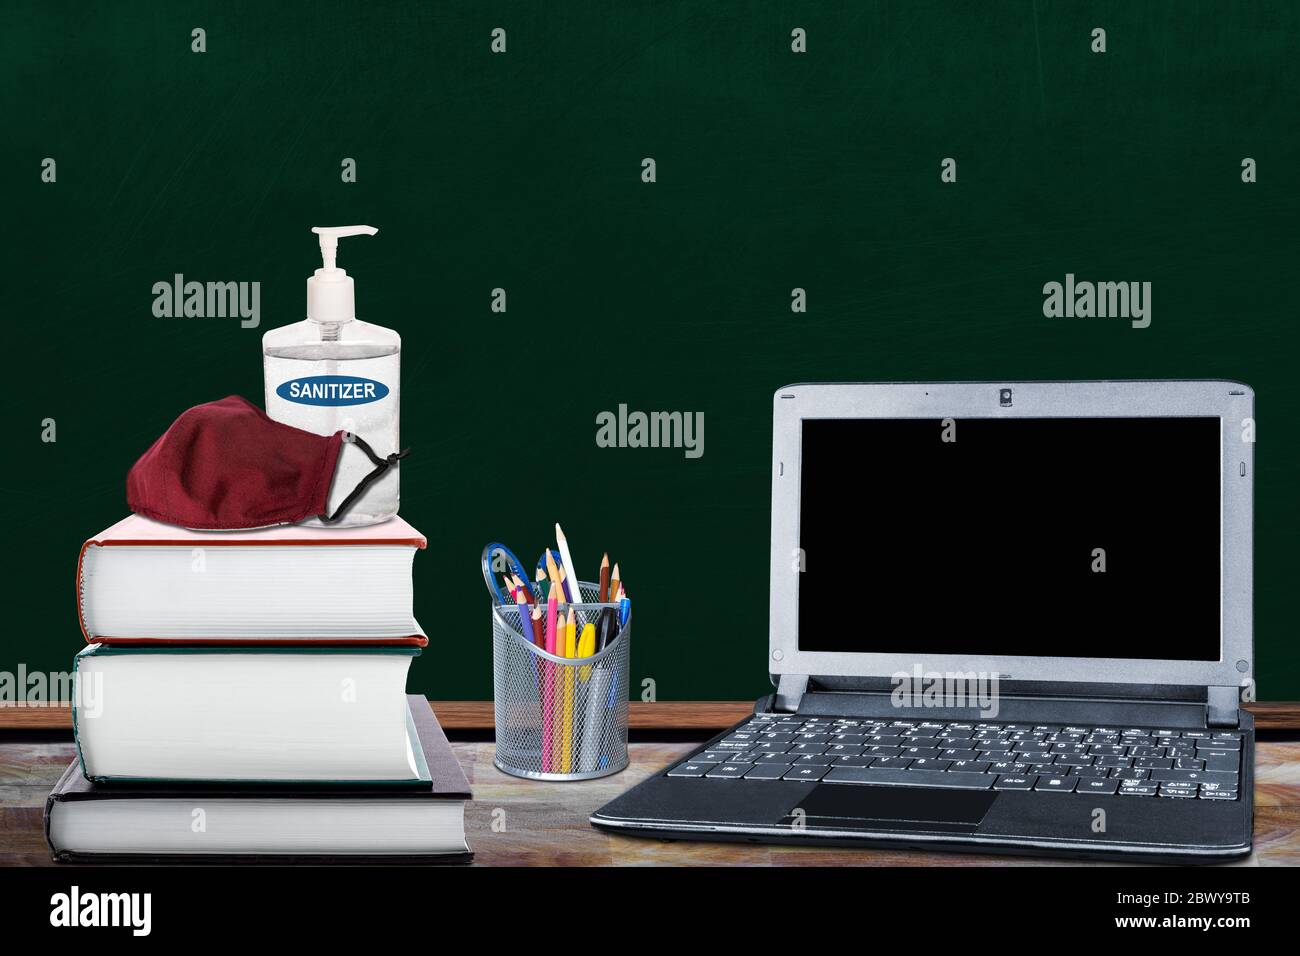 Education back-to-school New Normal concept during Covid-19 pandemic in classroom with books, hand sanitizer, cloth face mask, laptop and pencil holde Stock Photo